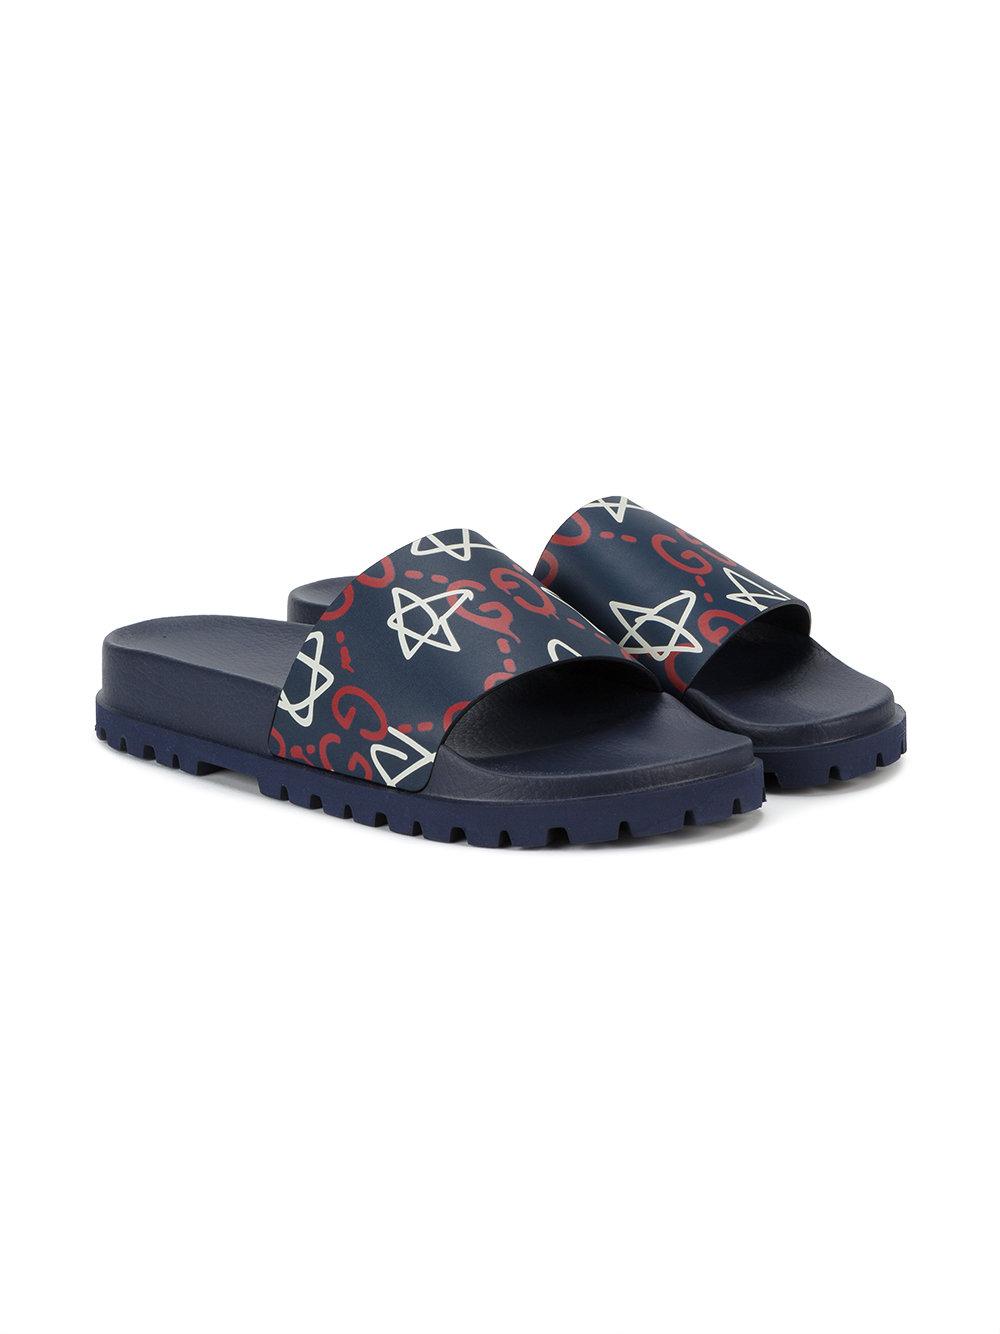 gucci slides with stars